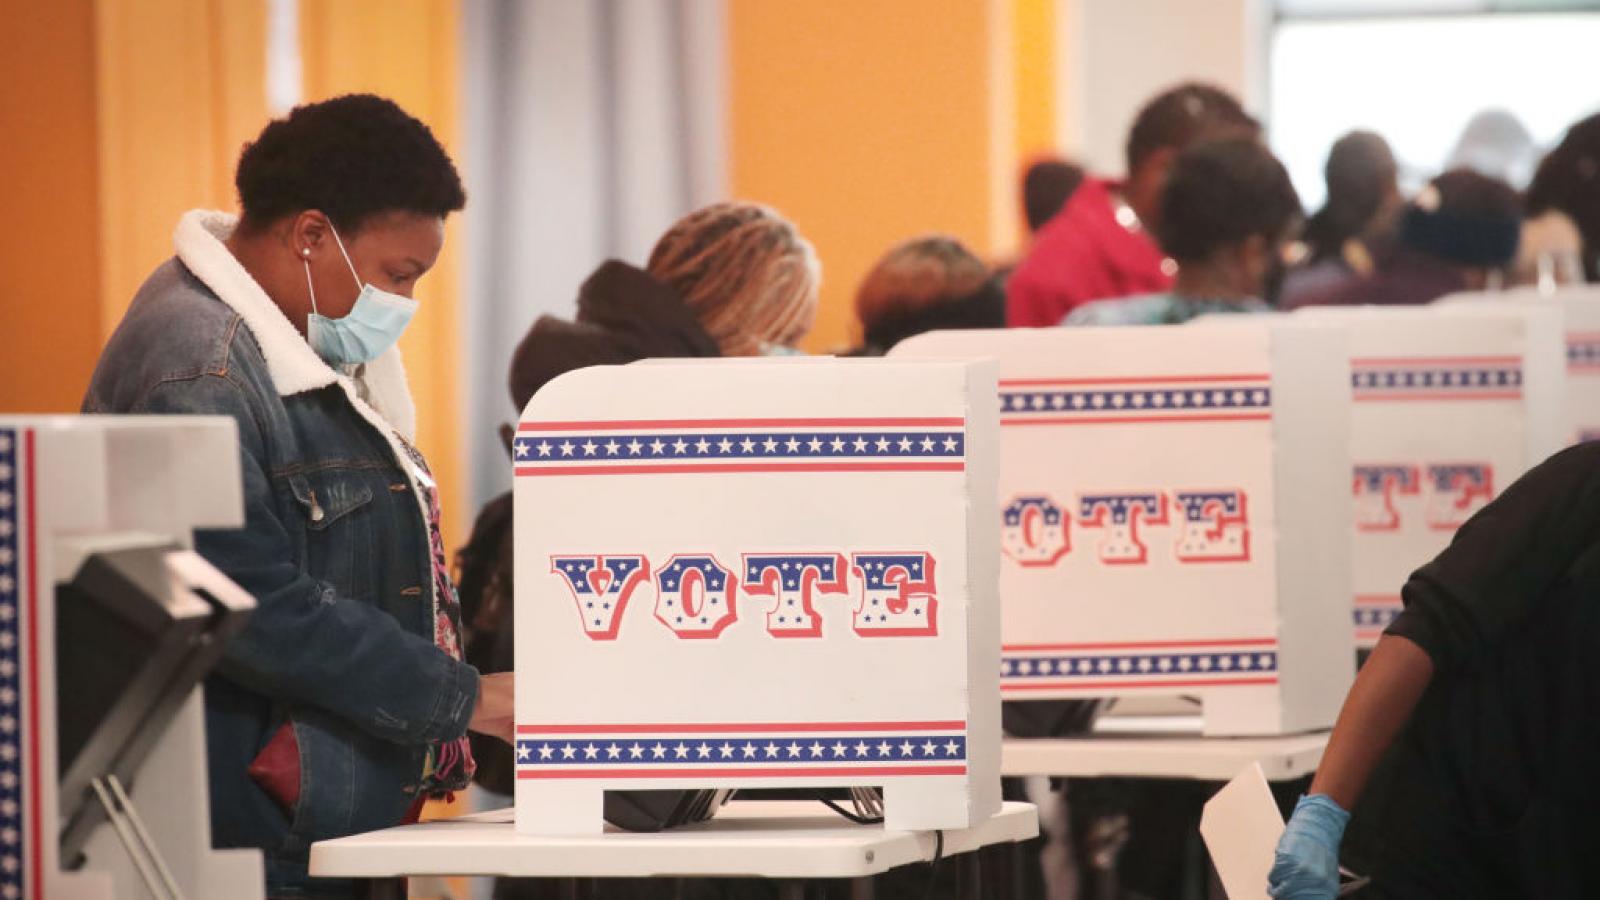 Battleground state of Wisconsin has 75,000 voters on first day of early